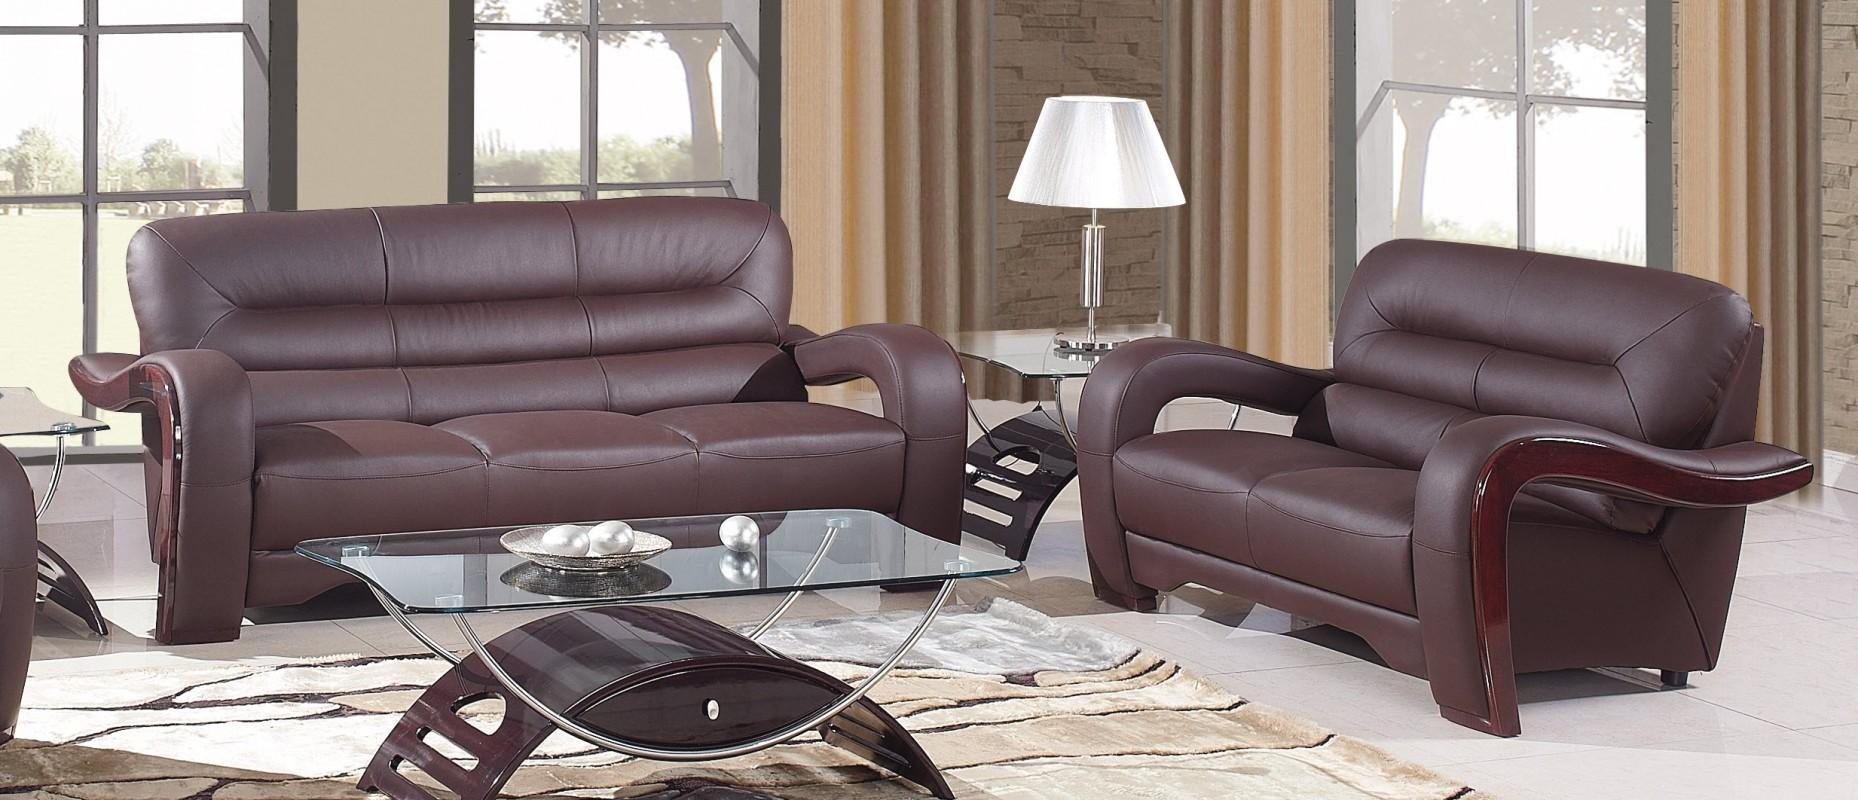 Contemporary, Modern Sofa Loveseat 992 992-BROWN-2PC in Brown Leather gel match